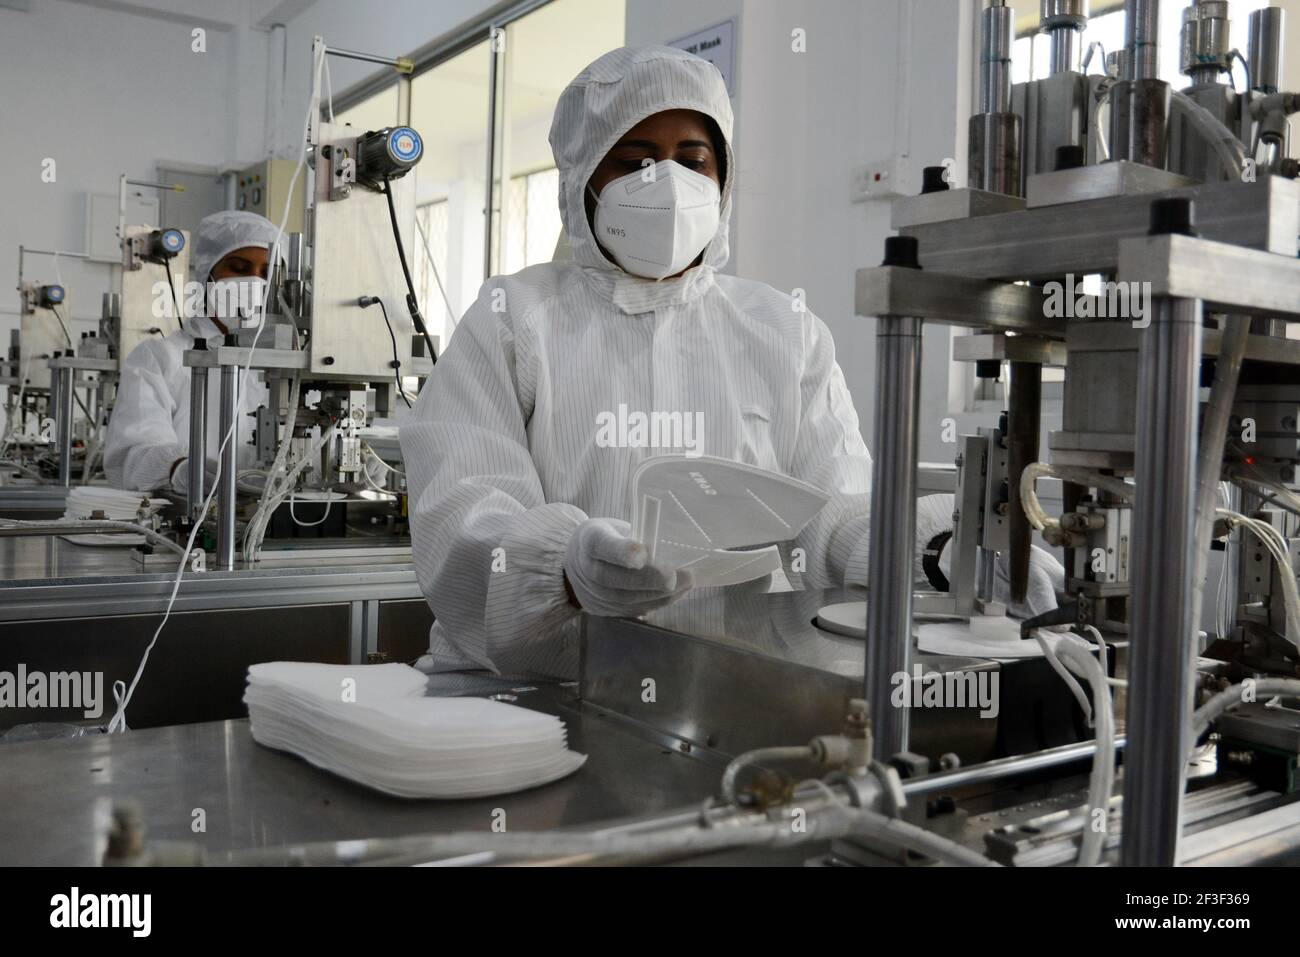 Gampaha, Sri Lanka. 16th Mar, 2021. Workers make masks at a mask manufacturing factory in Gampaha, Sri Lanka, on March 16, 2021. The number of COVID-19 cases in Sri Lanka surpassed the 88,000 mark on Tuesday after over 300 new cases were registered, statistics from the Health Ministry showed here. Credit: Gayan Sameera/Xinhua/Alamy Live News Stock Photo